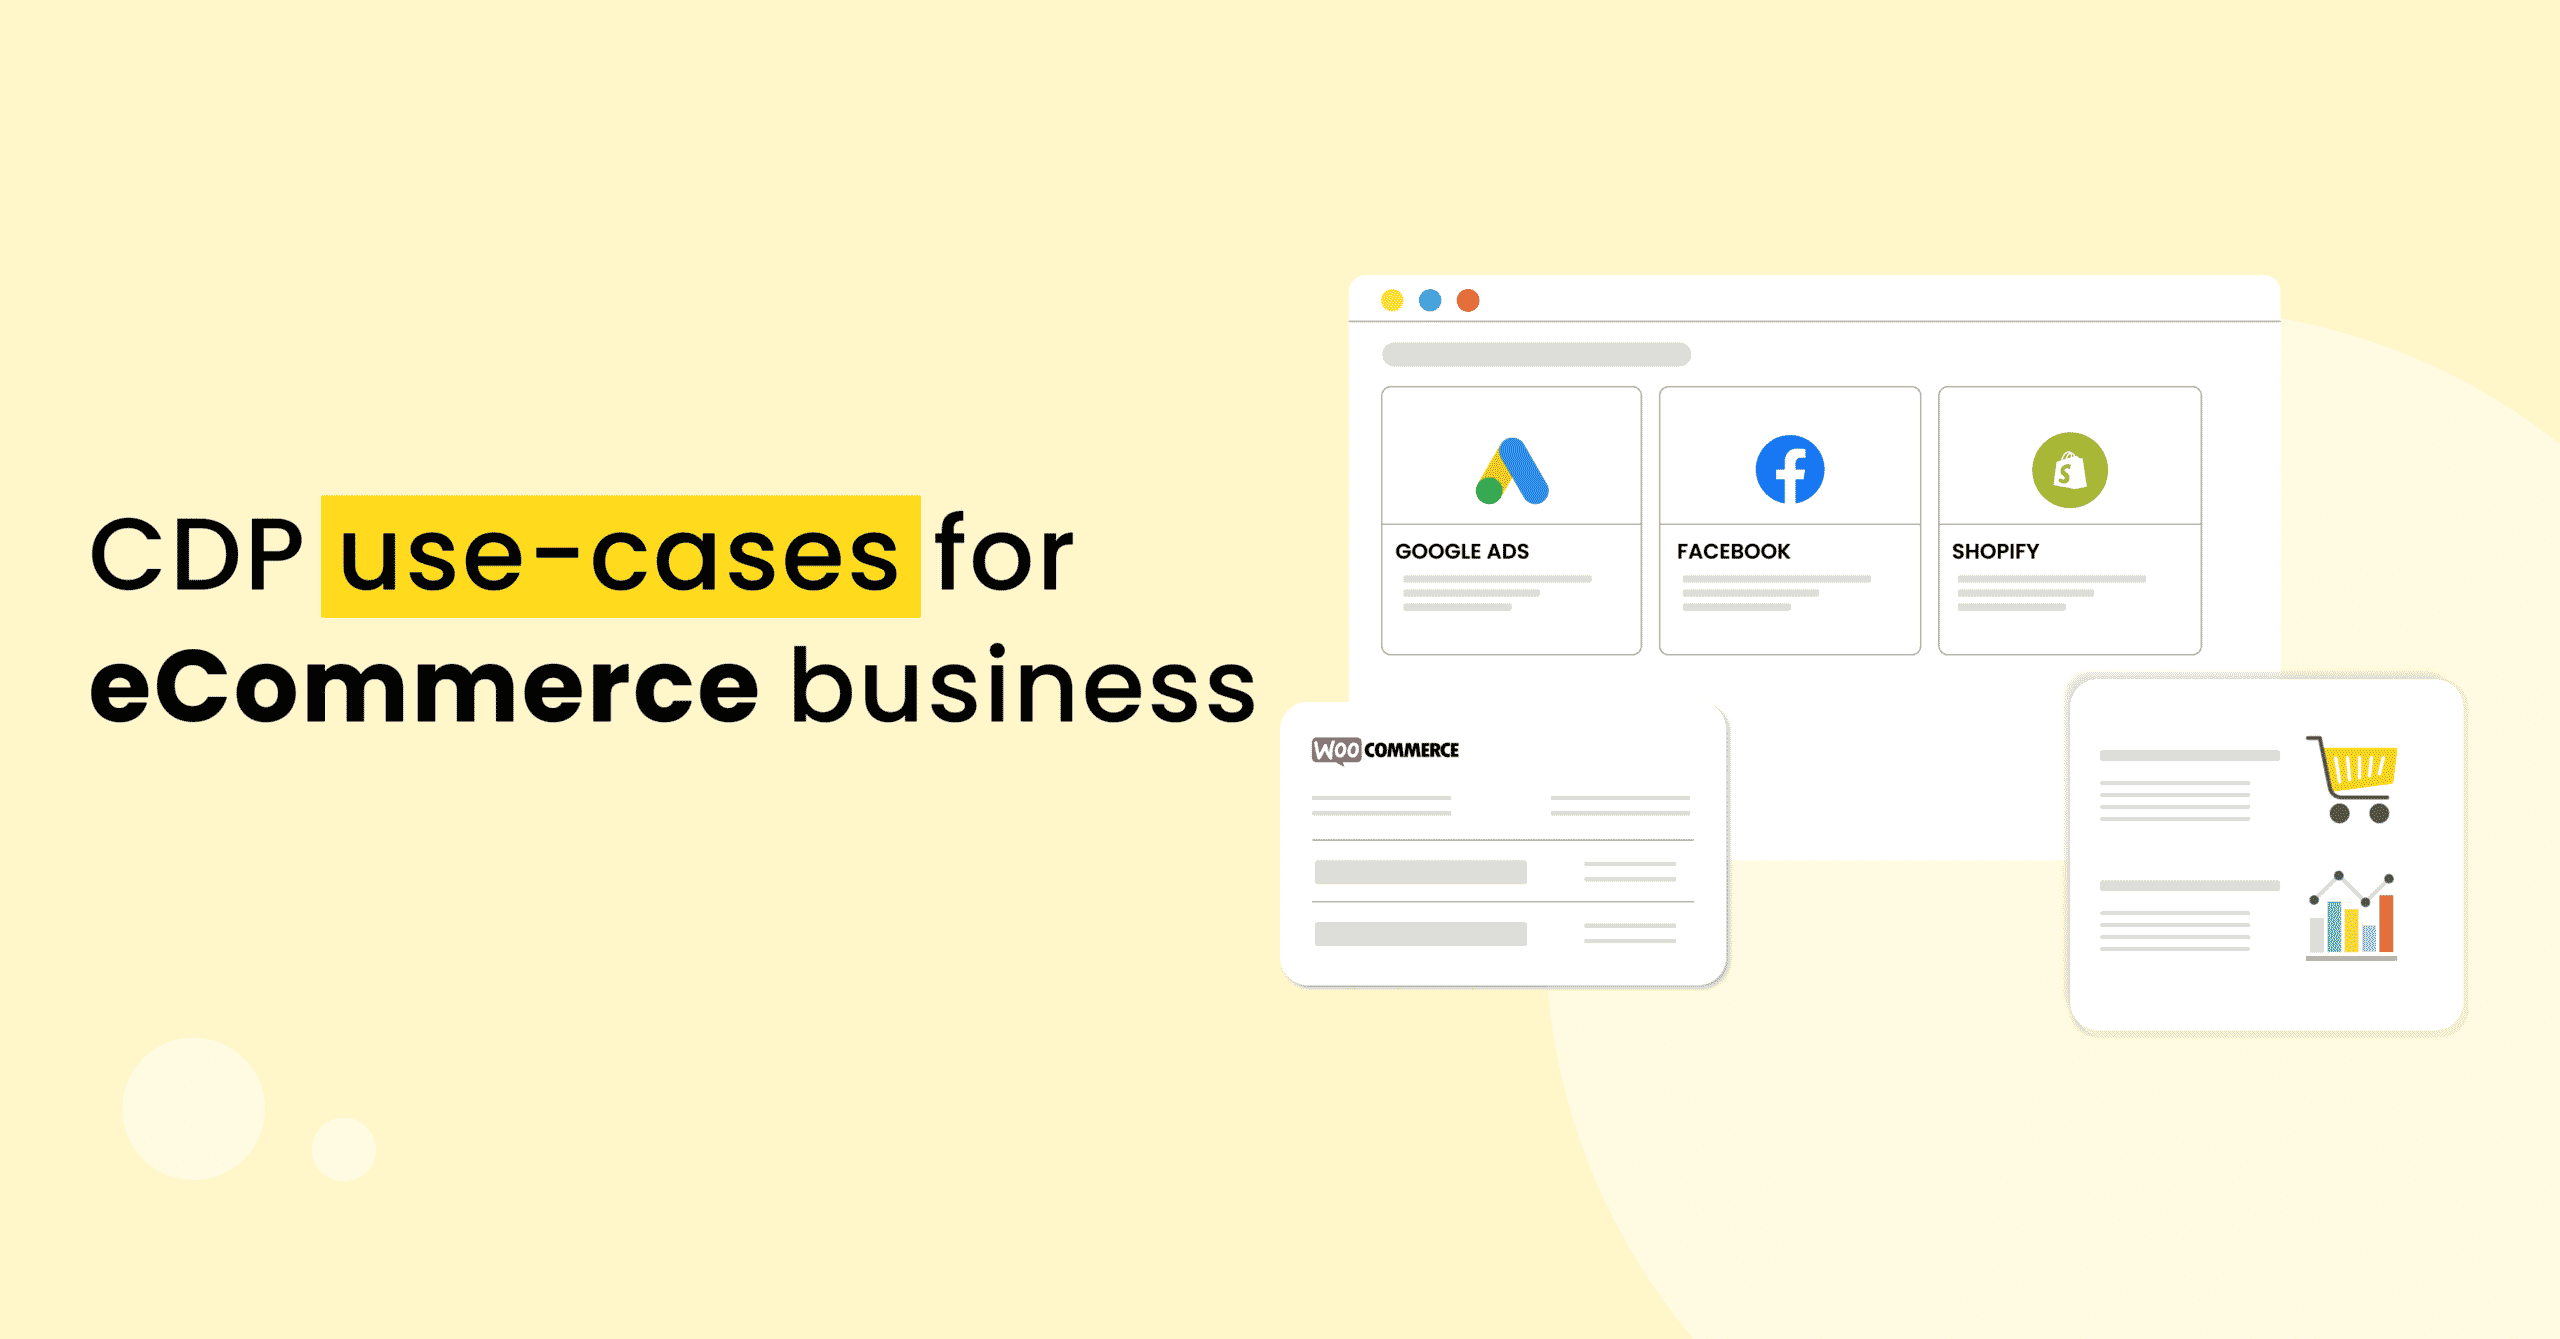 CDP use-cases for e-commerce businesses